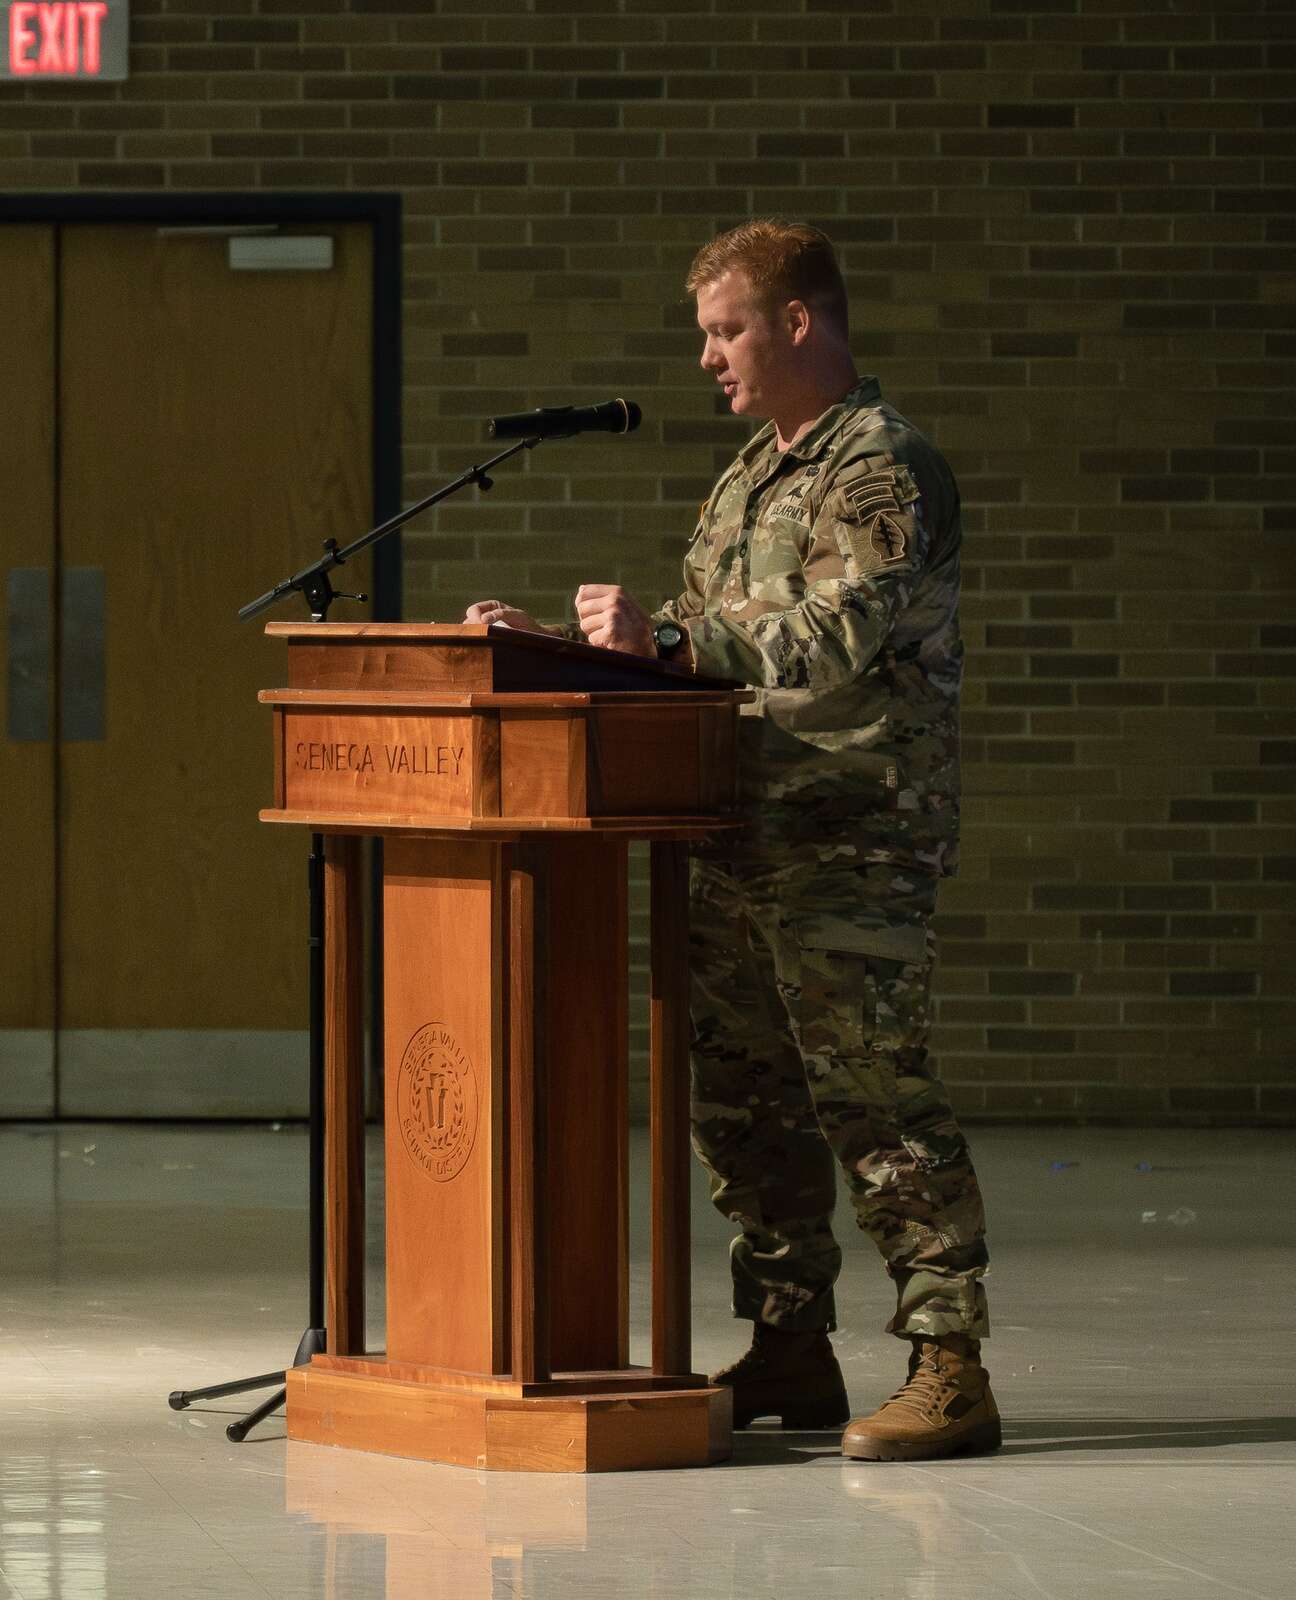 A member of the Green Berets speaks during a ceremony